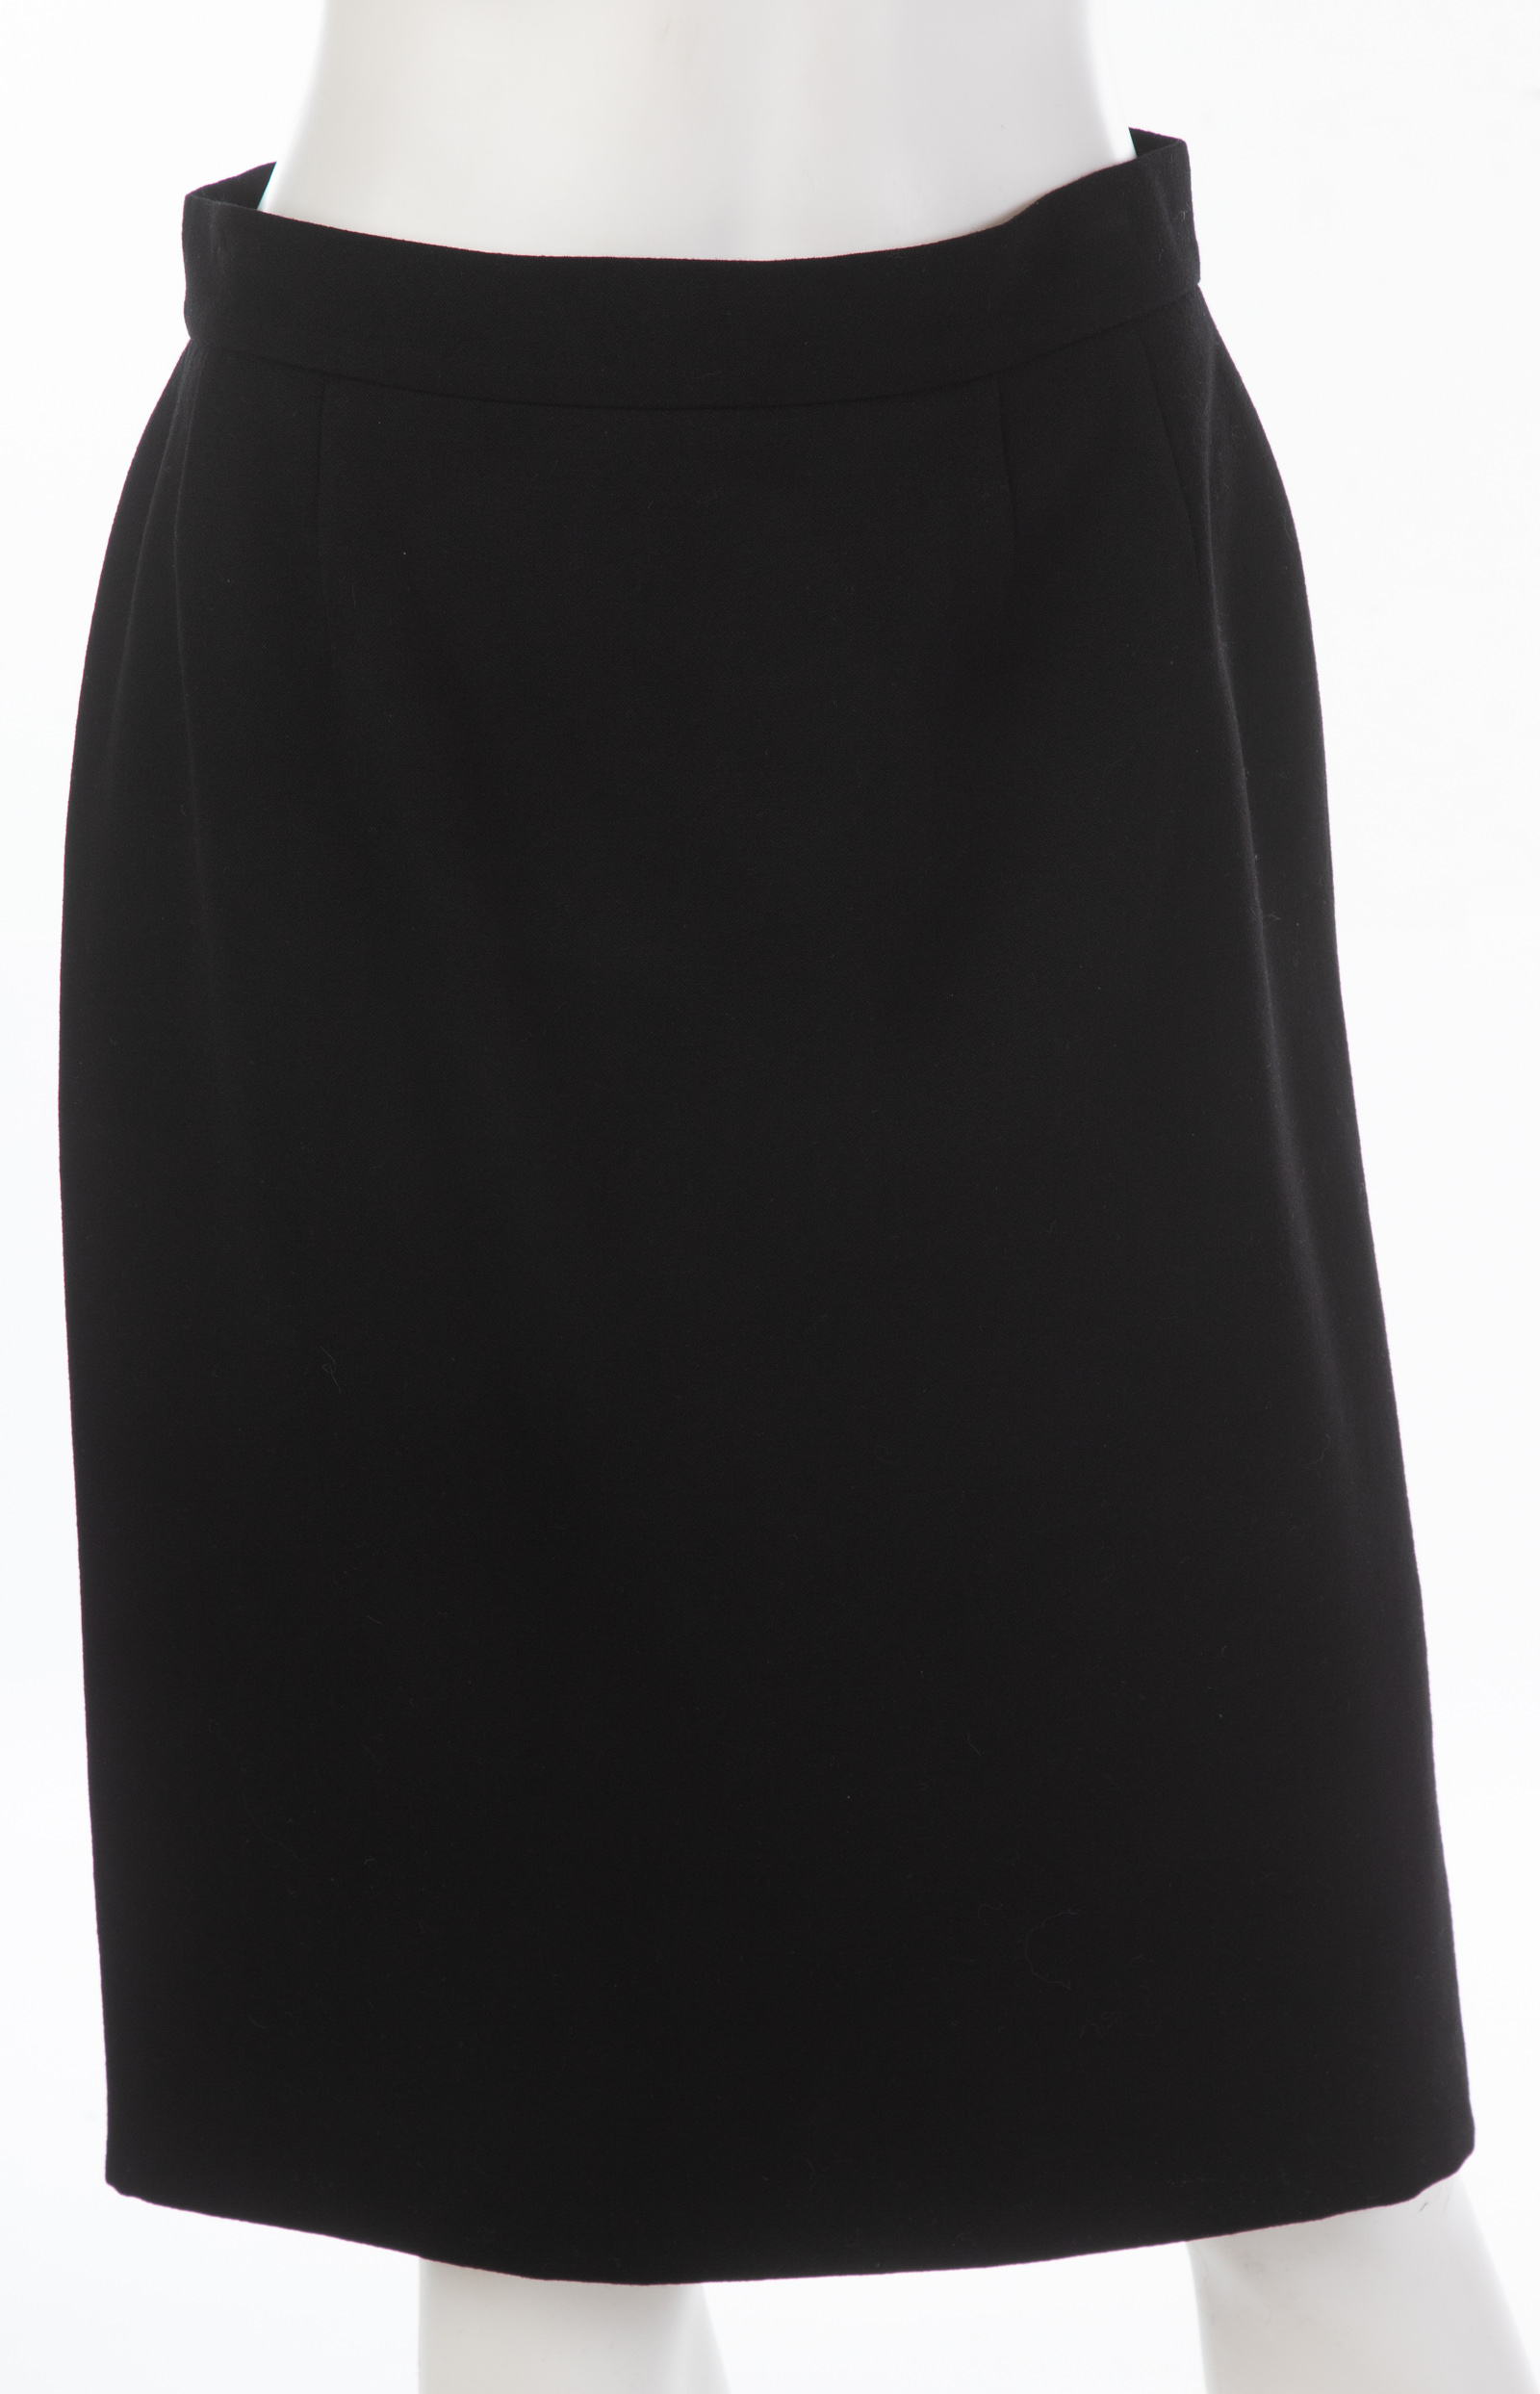 CHANEL BOUTIQUE BLACK WOOL SKIRT